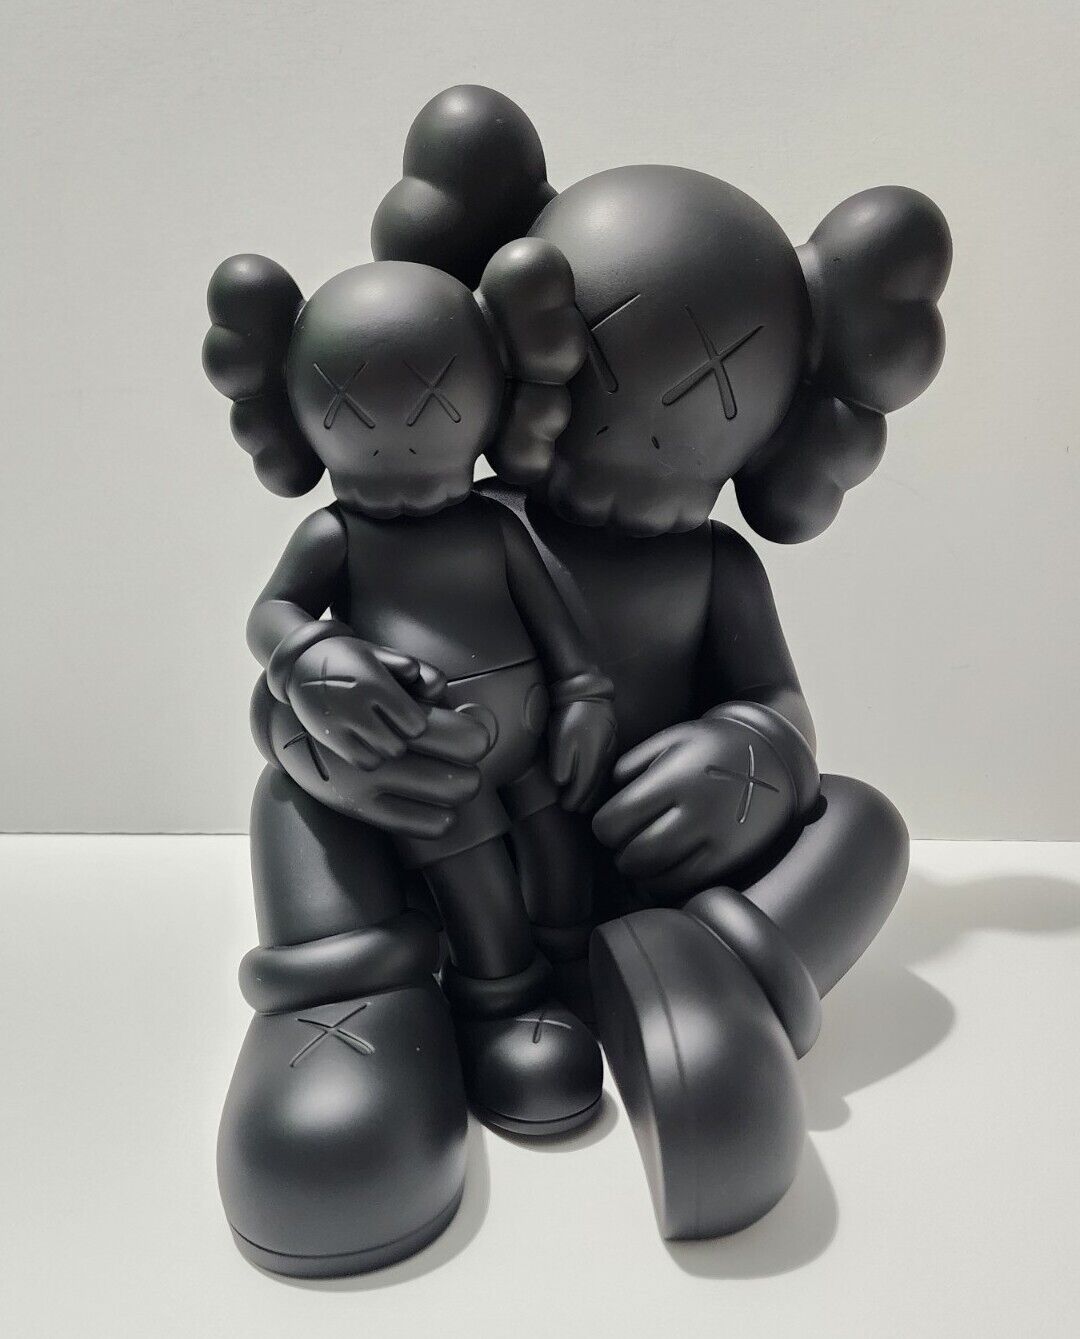 KAWS Holiday Changbai Mountain Vinyl Figure Black 100% Authentic New in Hand